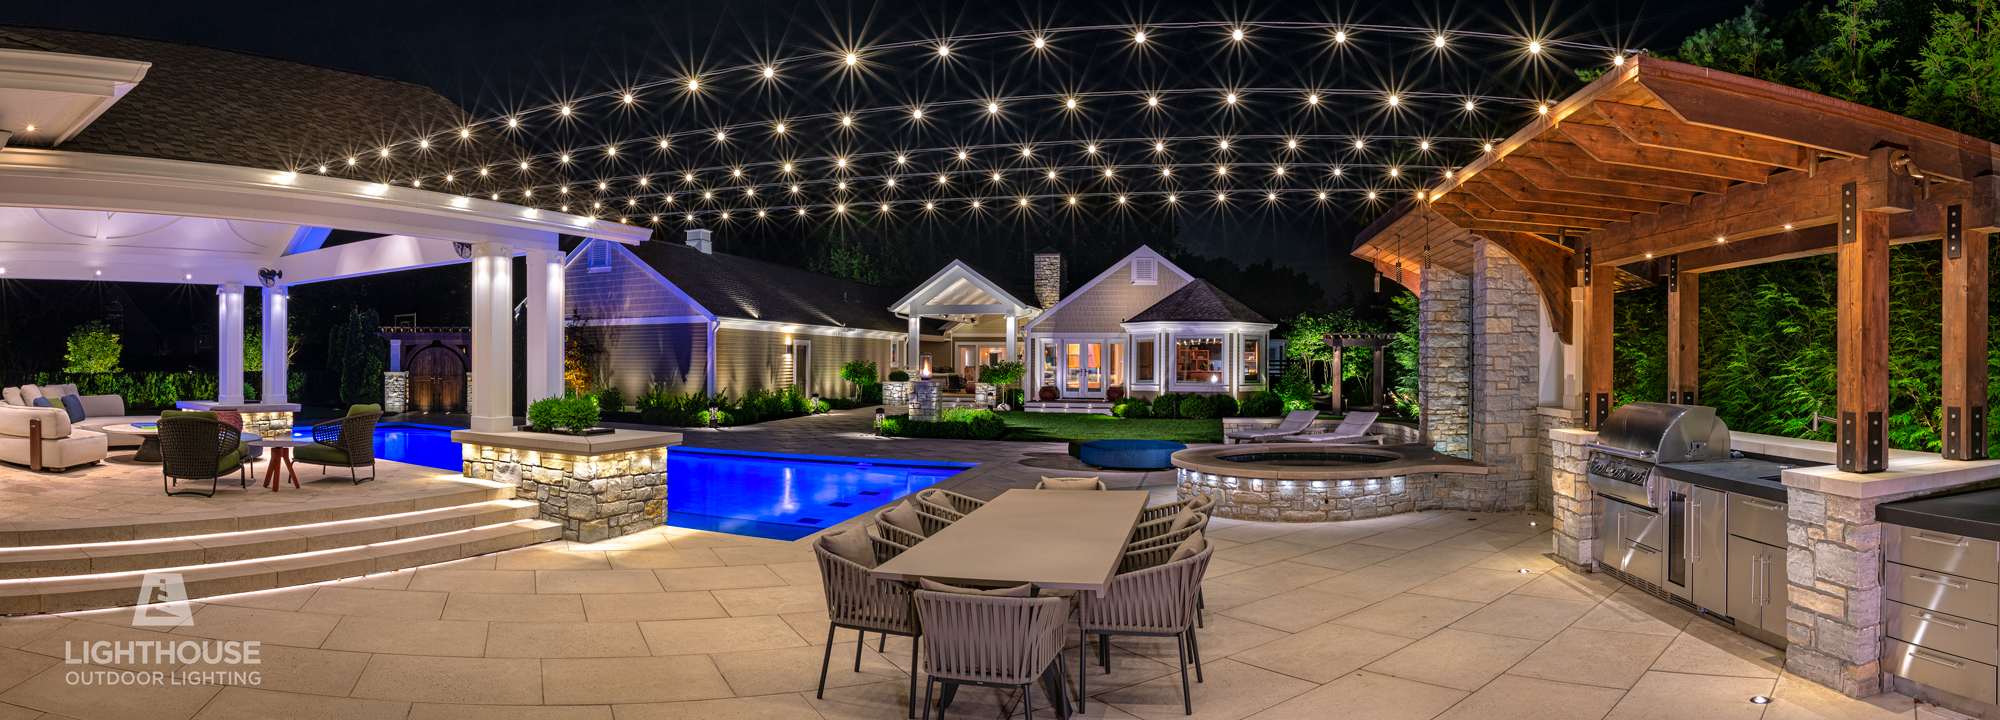 Patio String Lighting in Kettering , OH